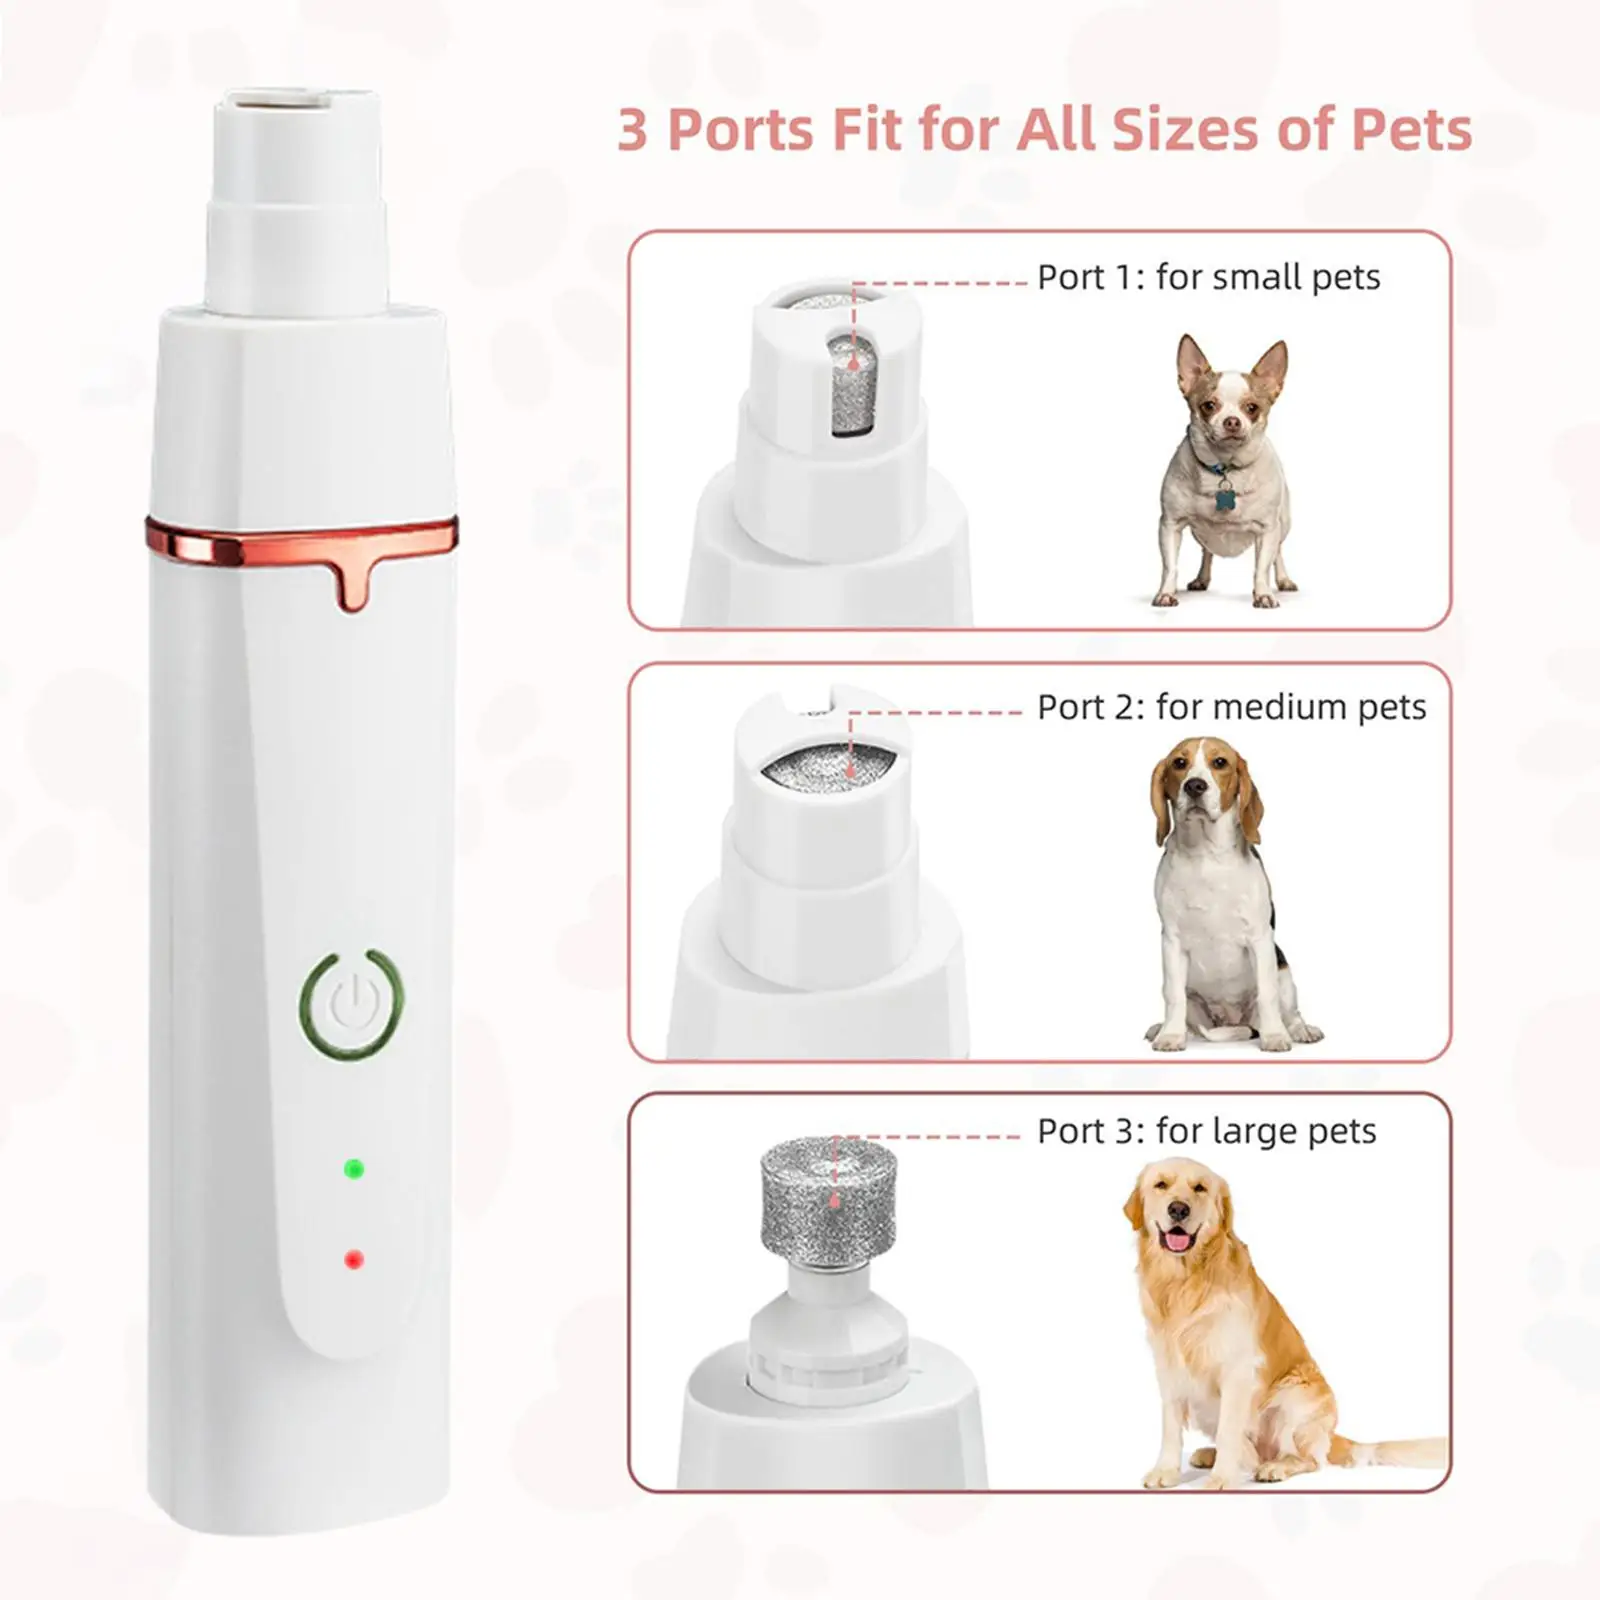 4 in 1 Pet Dog Grooming Kit Nail Grinder with 4 Combs Silent Electric Hair Clippers Trimmers for Trimming Grinding Paws Shaving